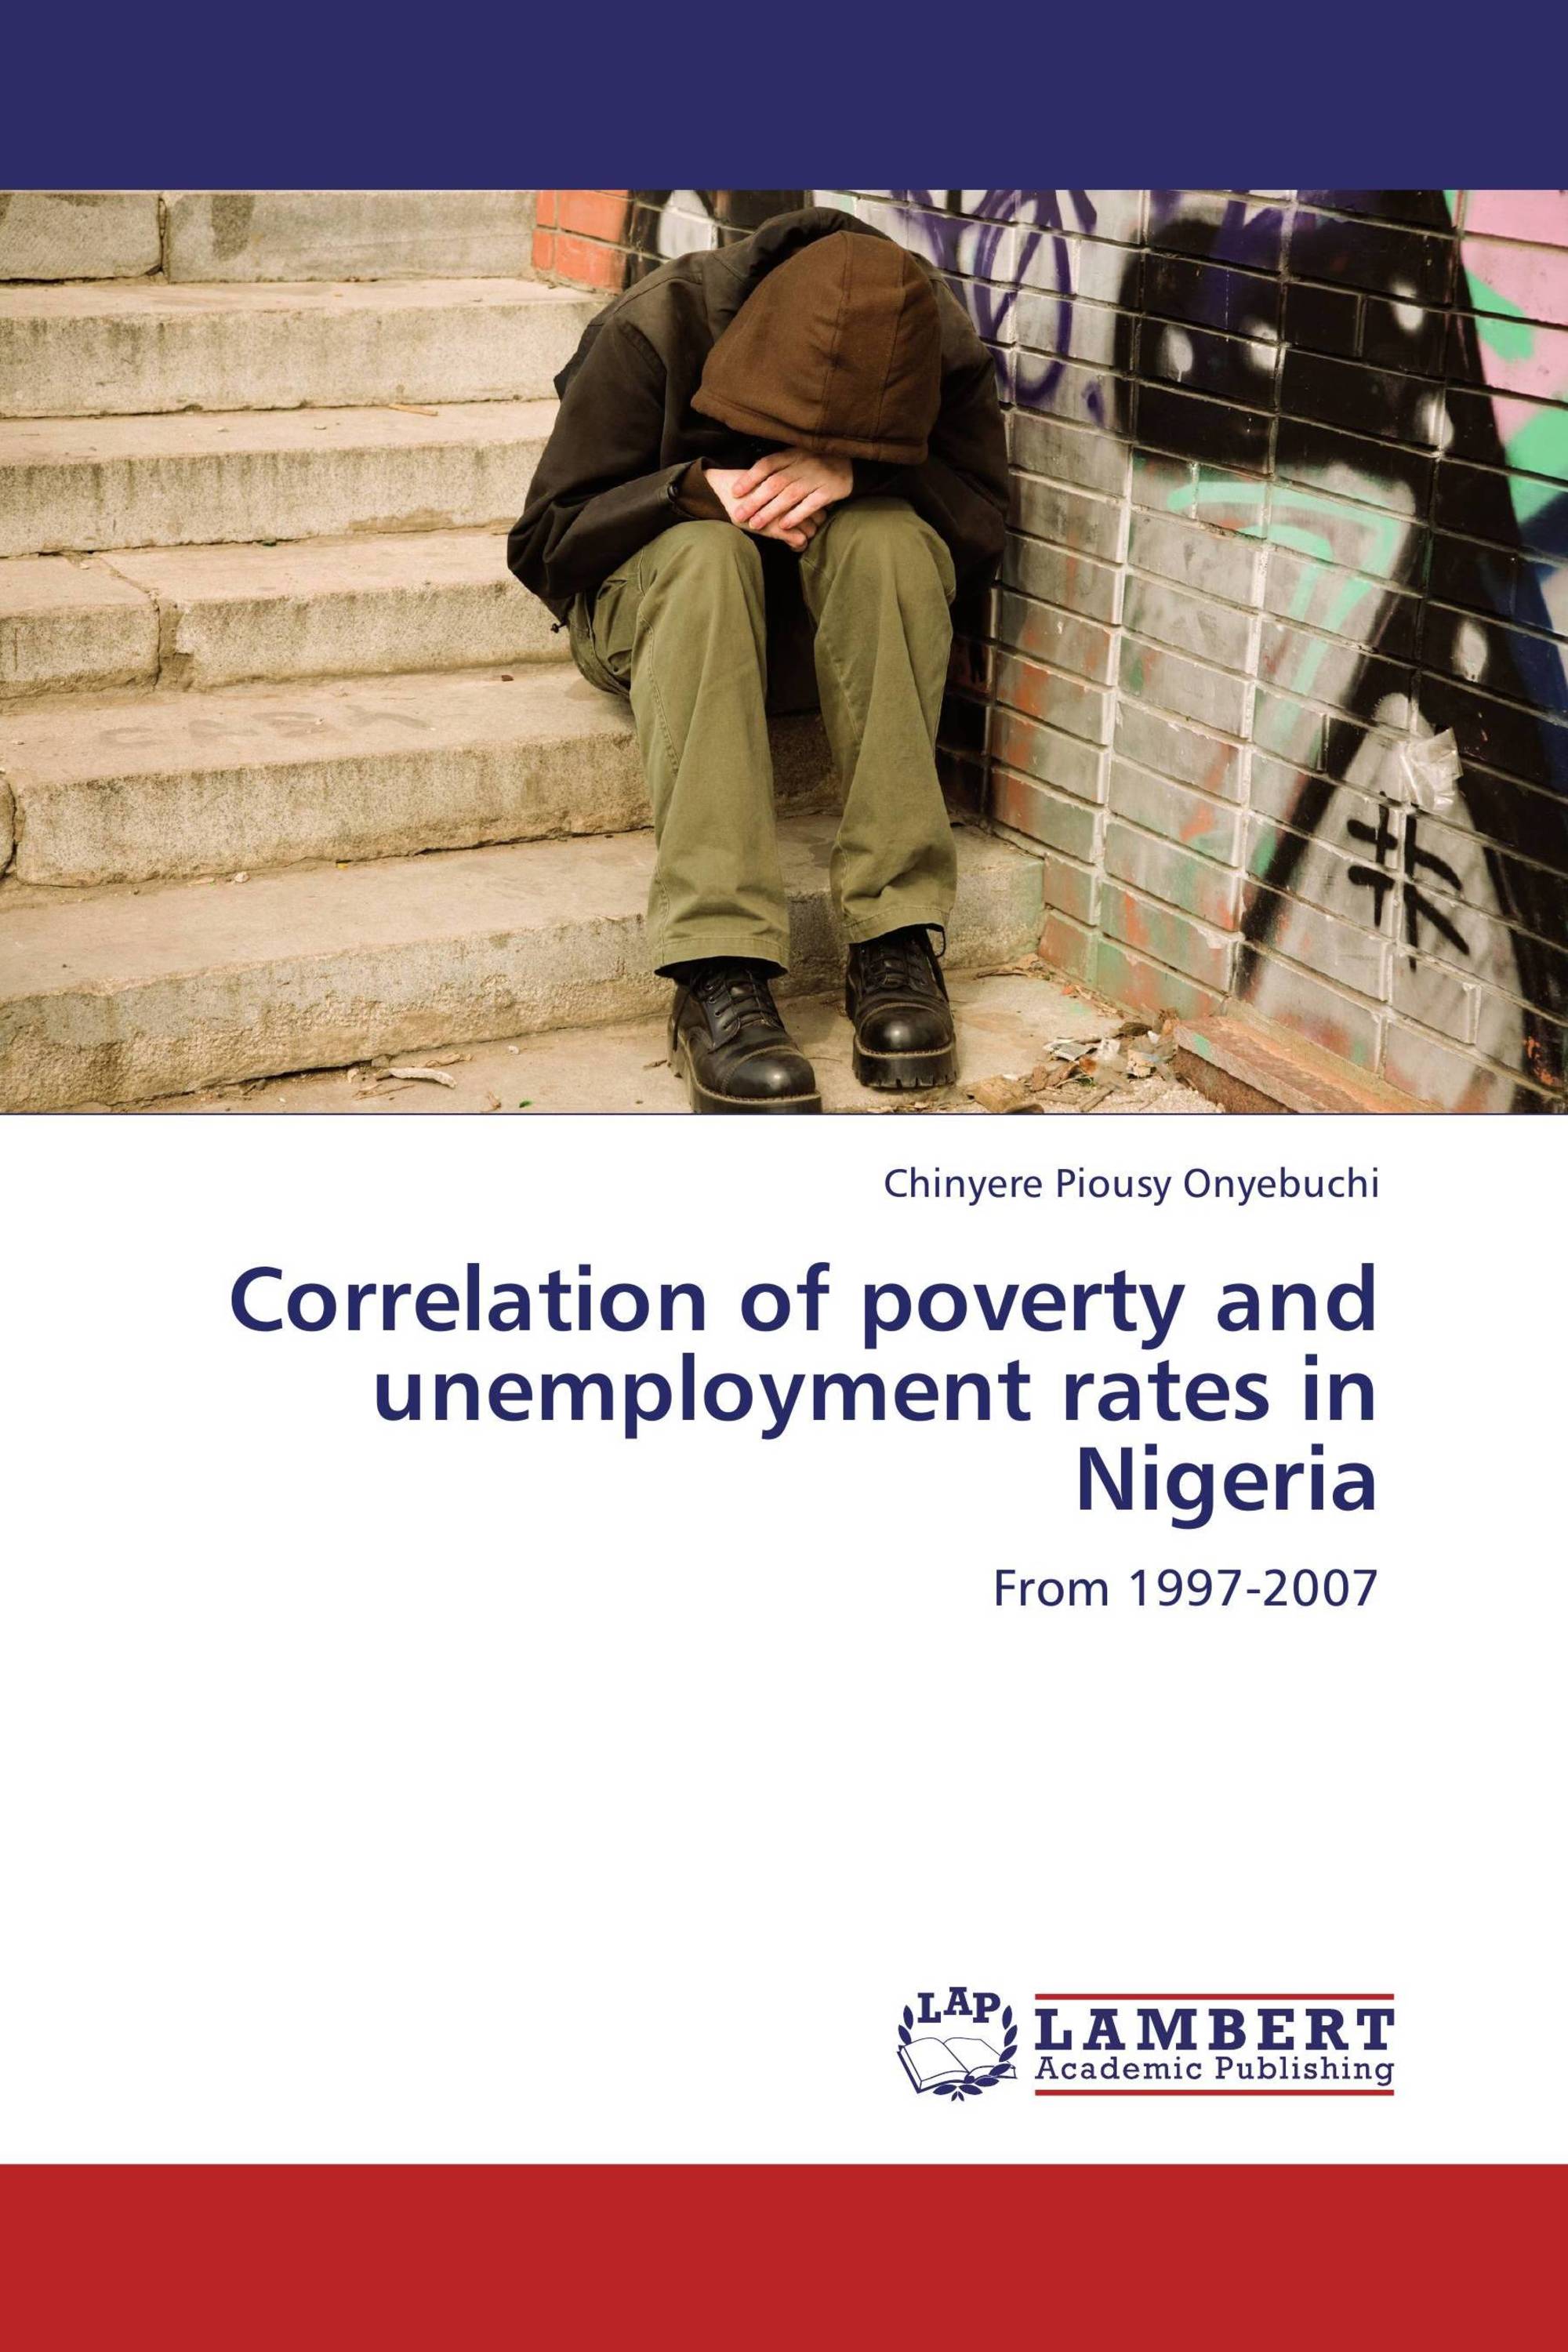 literature review on poverty and unemployment